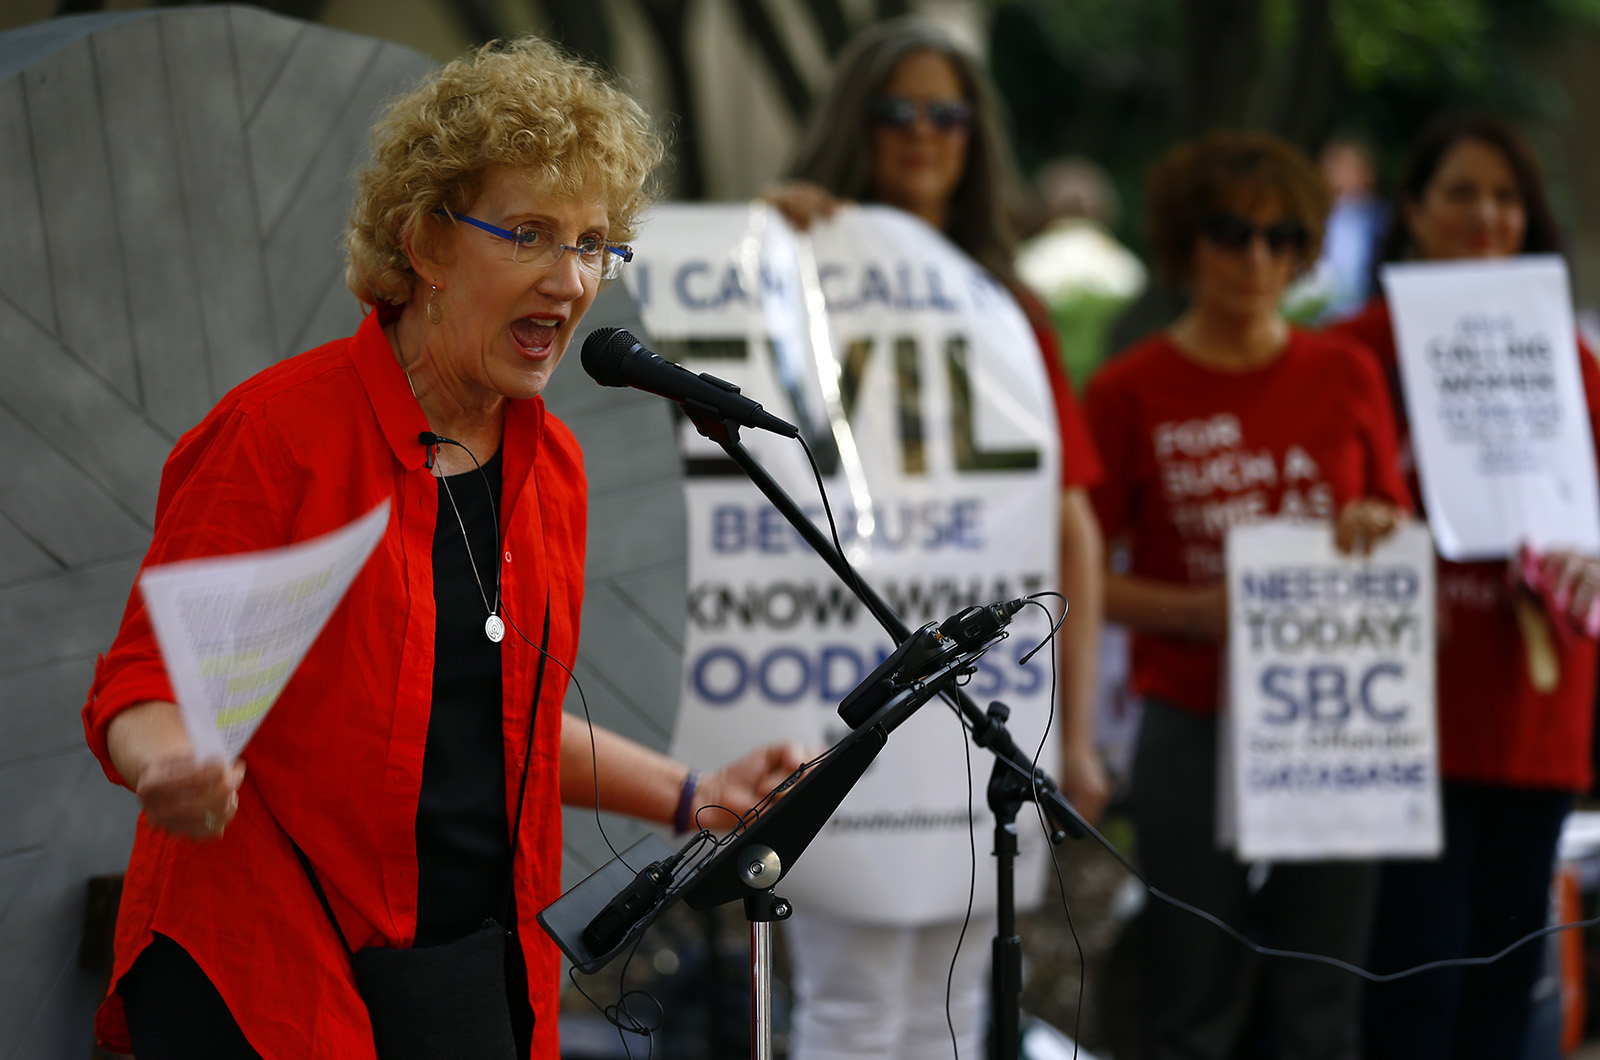 Online News Christa Brown talks about her abuse at a rally outside the annual meeting of the Southern Baptist Convention at the Birmingham-Jefferson Convention Complex, June 11, 2019, in Birmingham, Alabama. RNS photo by Butch Dill